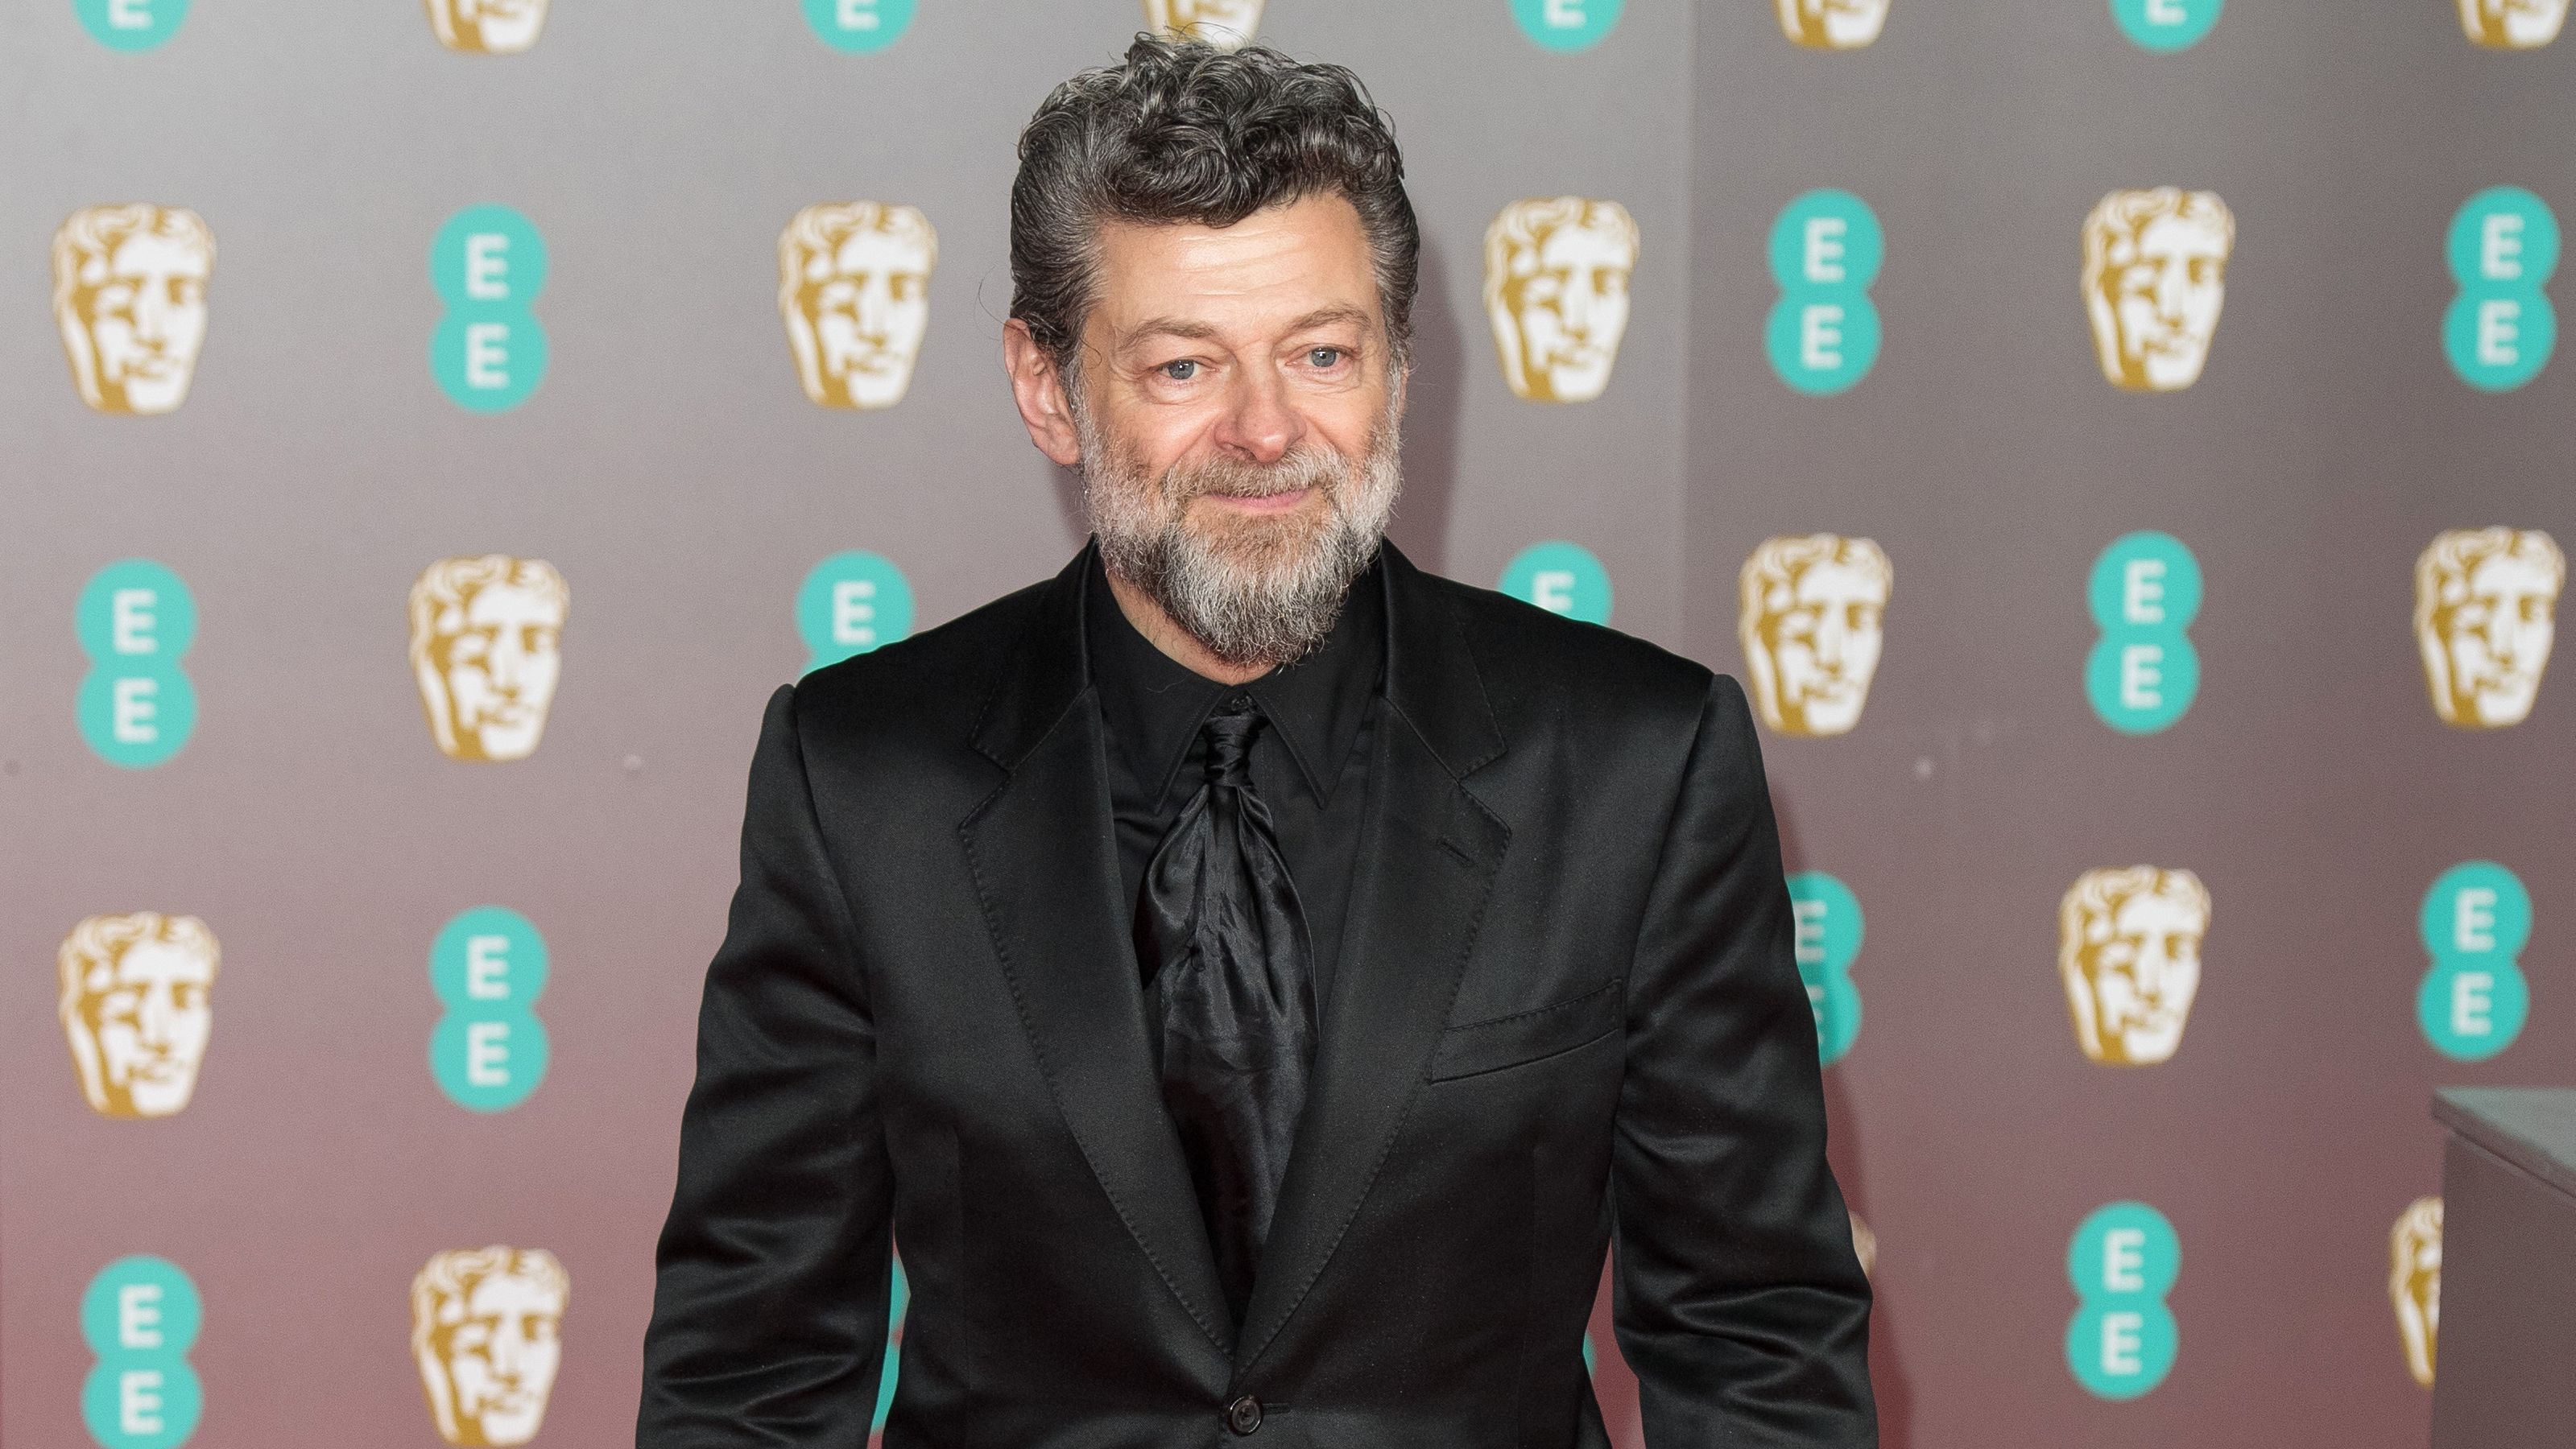 Andy Serkis to read the entirety of 'The Hobbit' in 12-hour charity stream